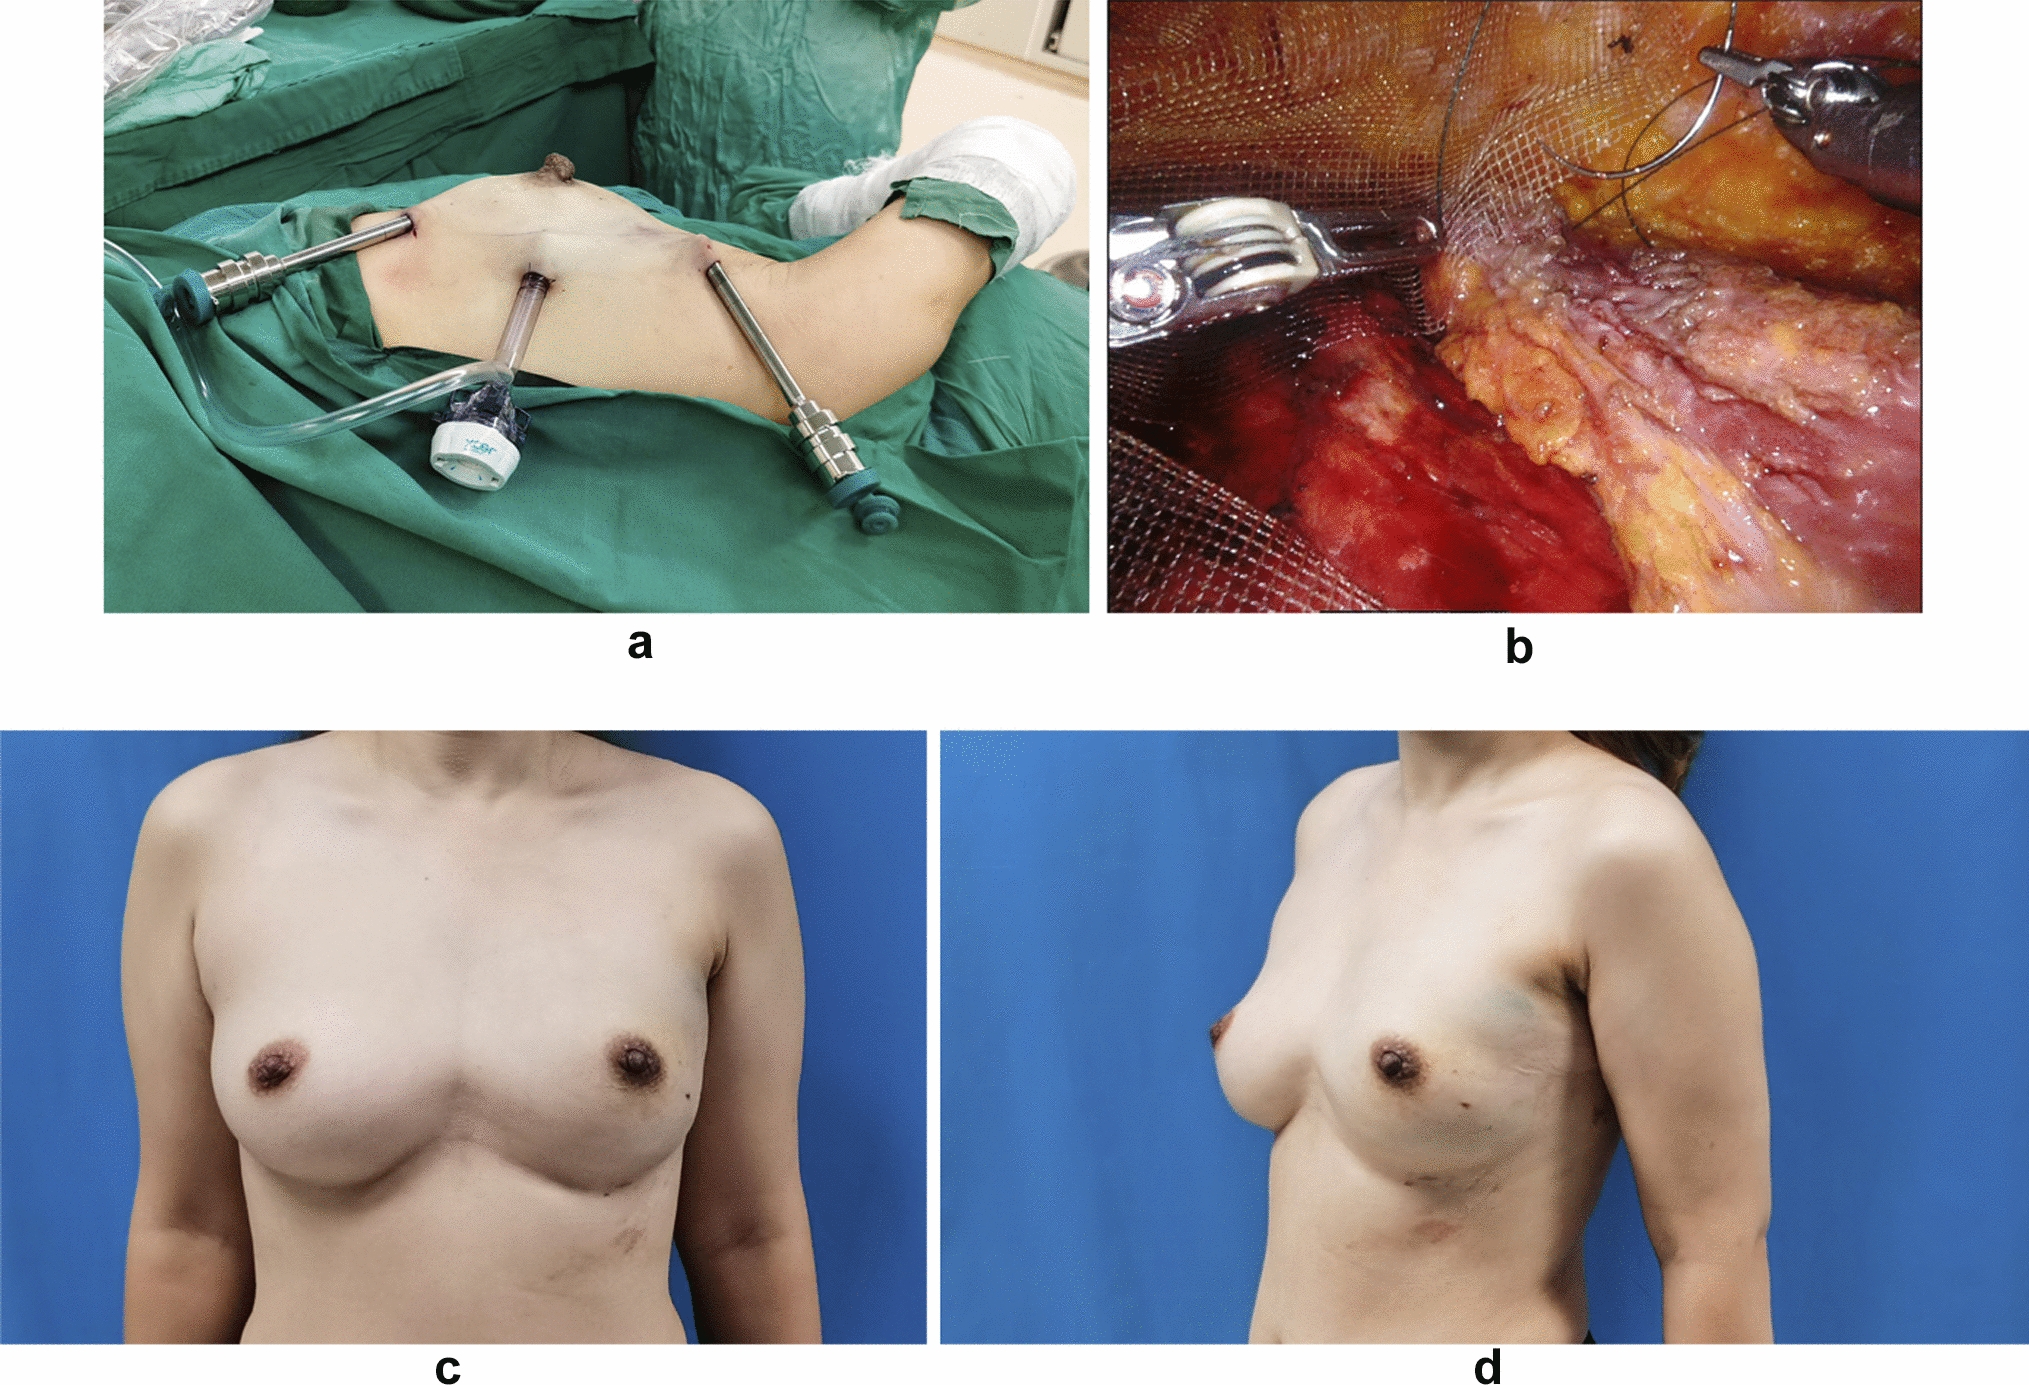 Patient-reported outcomes of mesh in minimally invasive (laparoscopic/robot-assisted) immediate subpectoral prosthesis breast reconstruction: a retrospective study